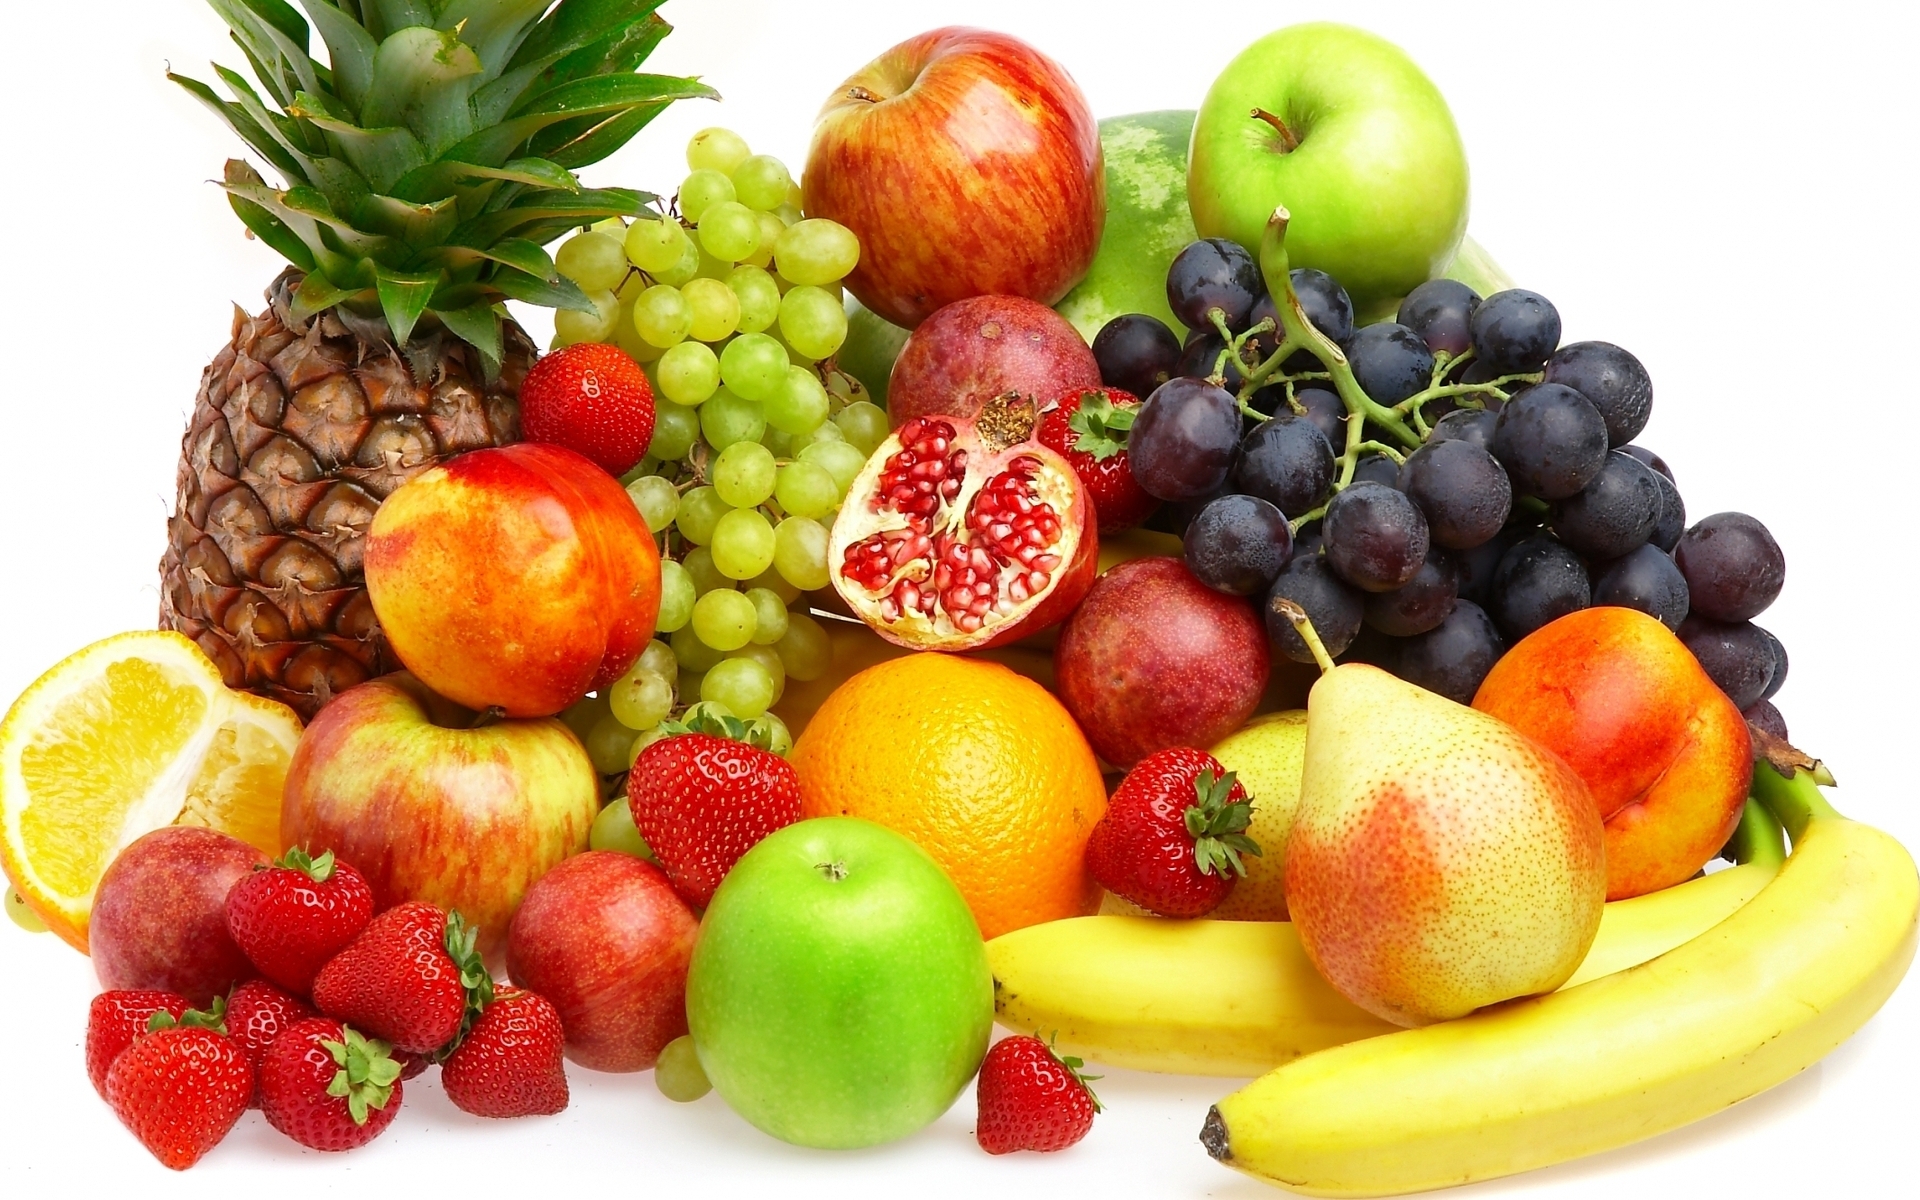 Assorted Fruits Wallpaper And Image Pictures Photos